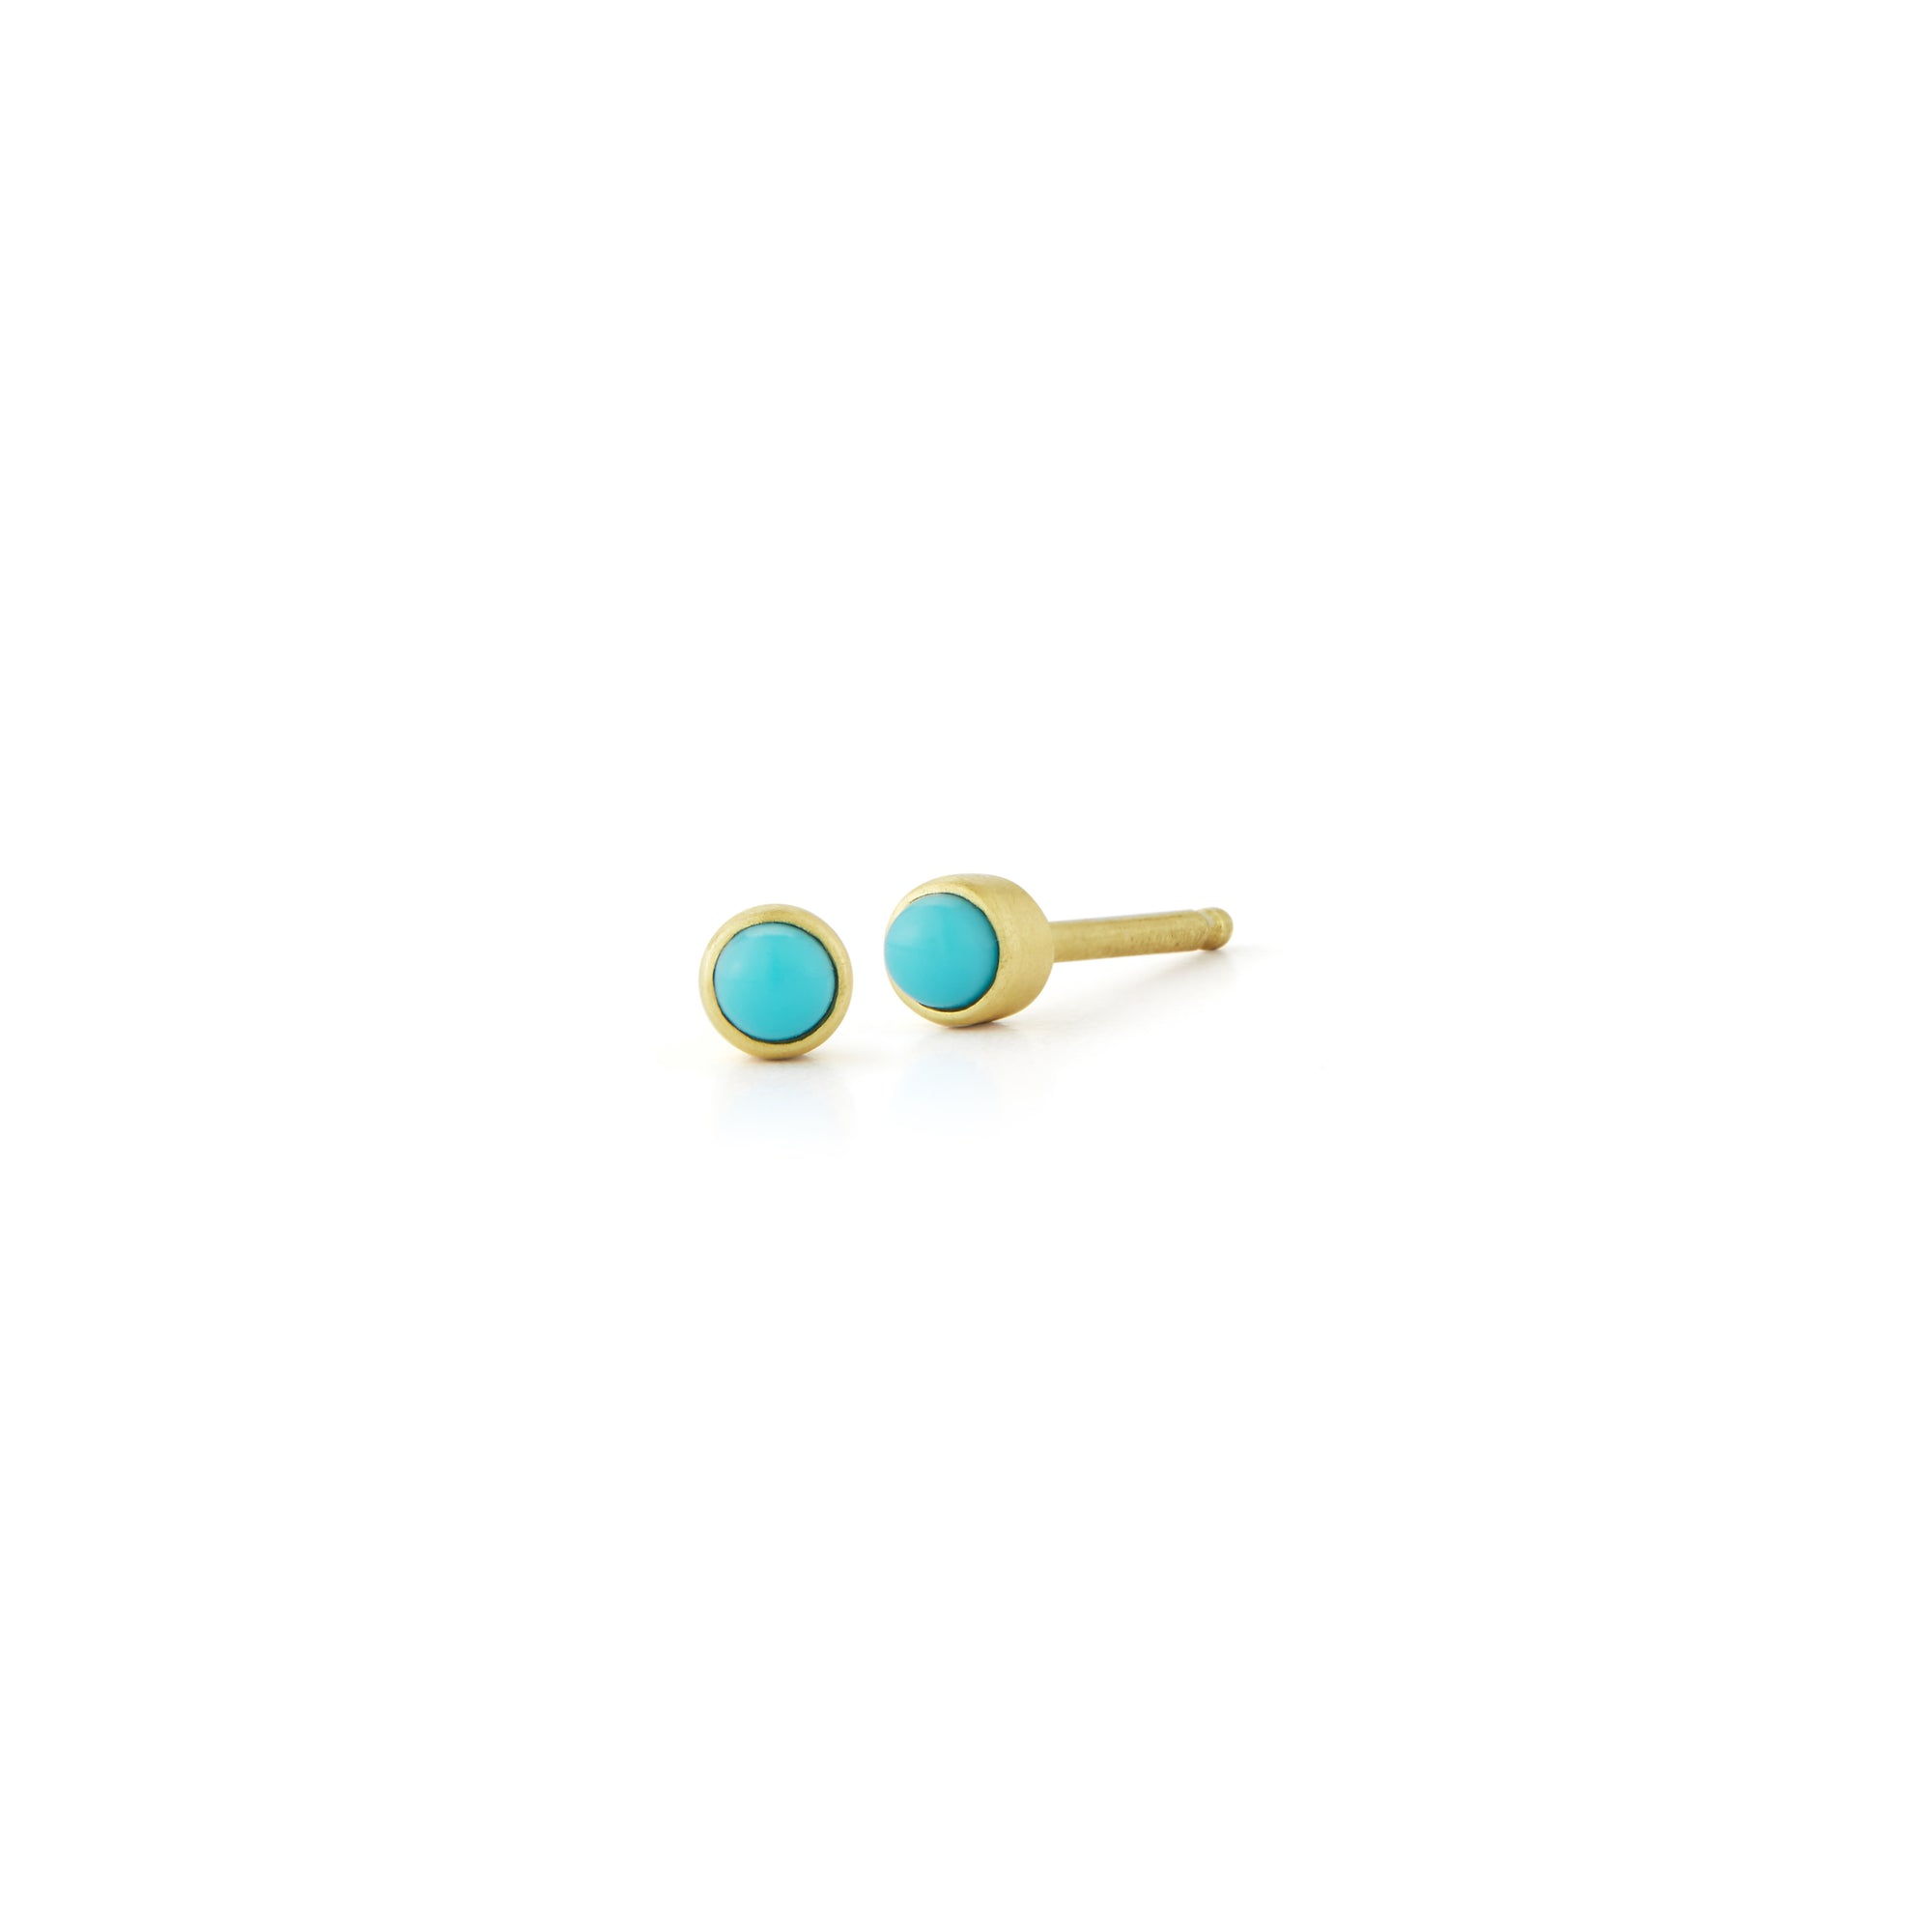 simple everyday turquoise blue stud earring in 14k satin gold for summer by finn by candice pool neistat 